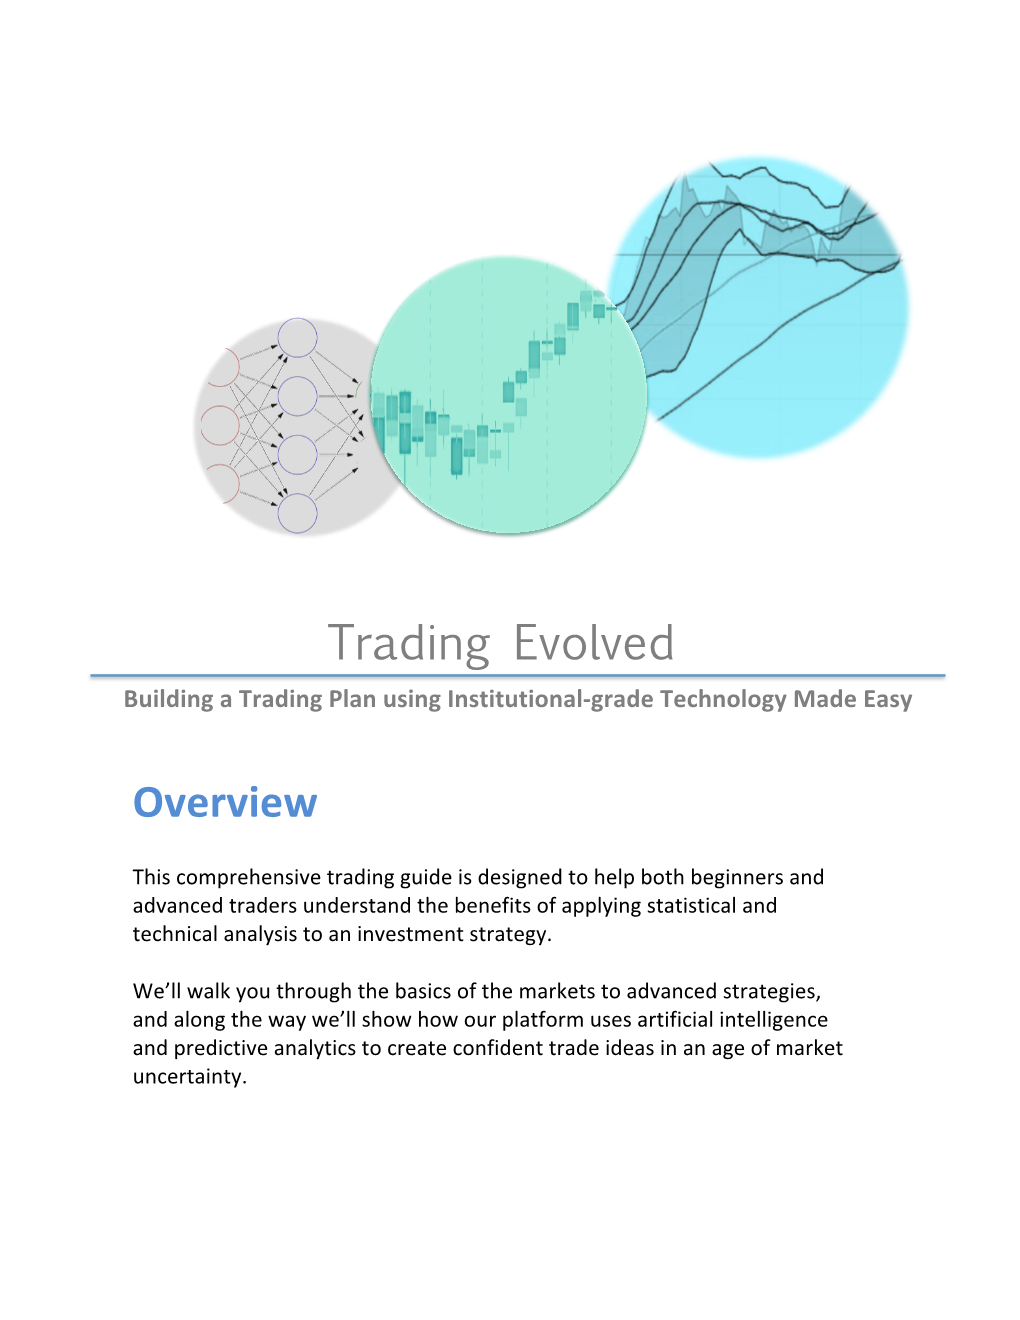 Trading Evolved Overview